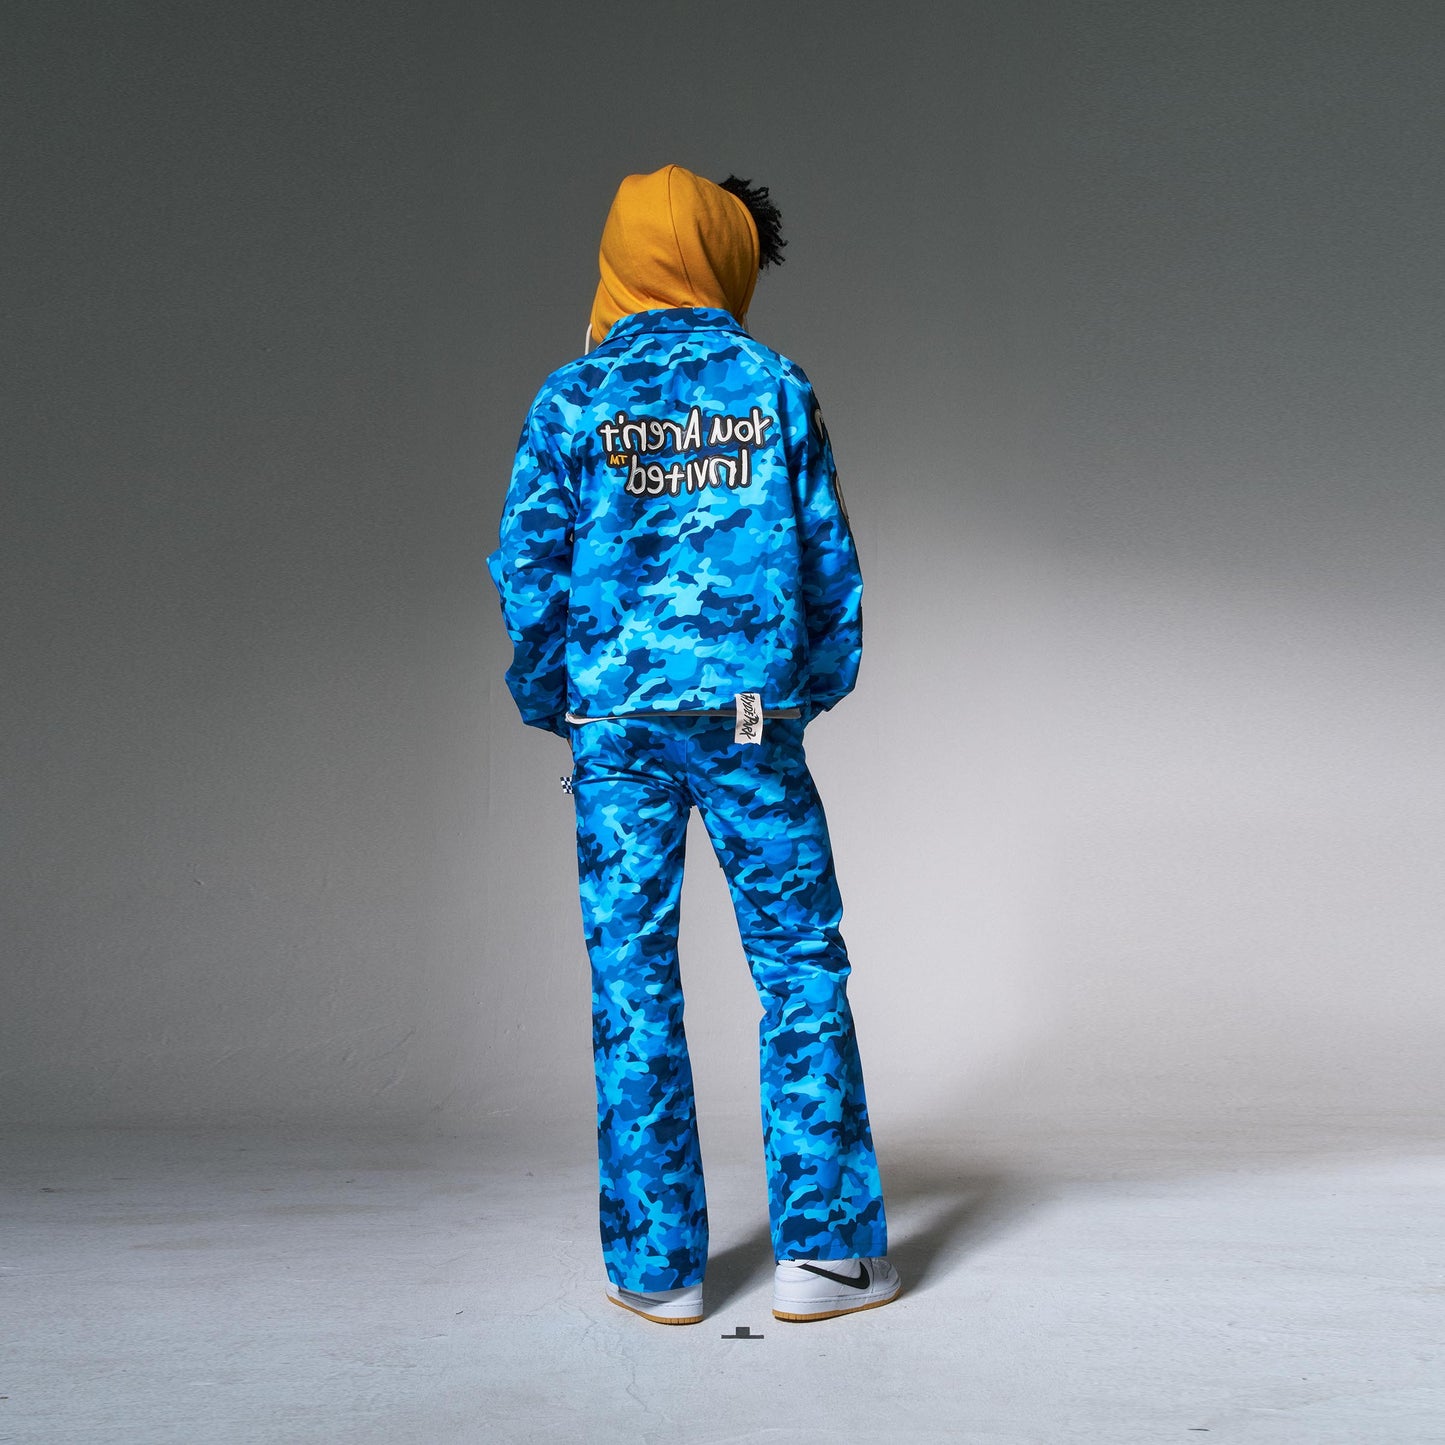 Find The Zip Camo Pant - Blue